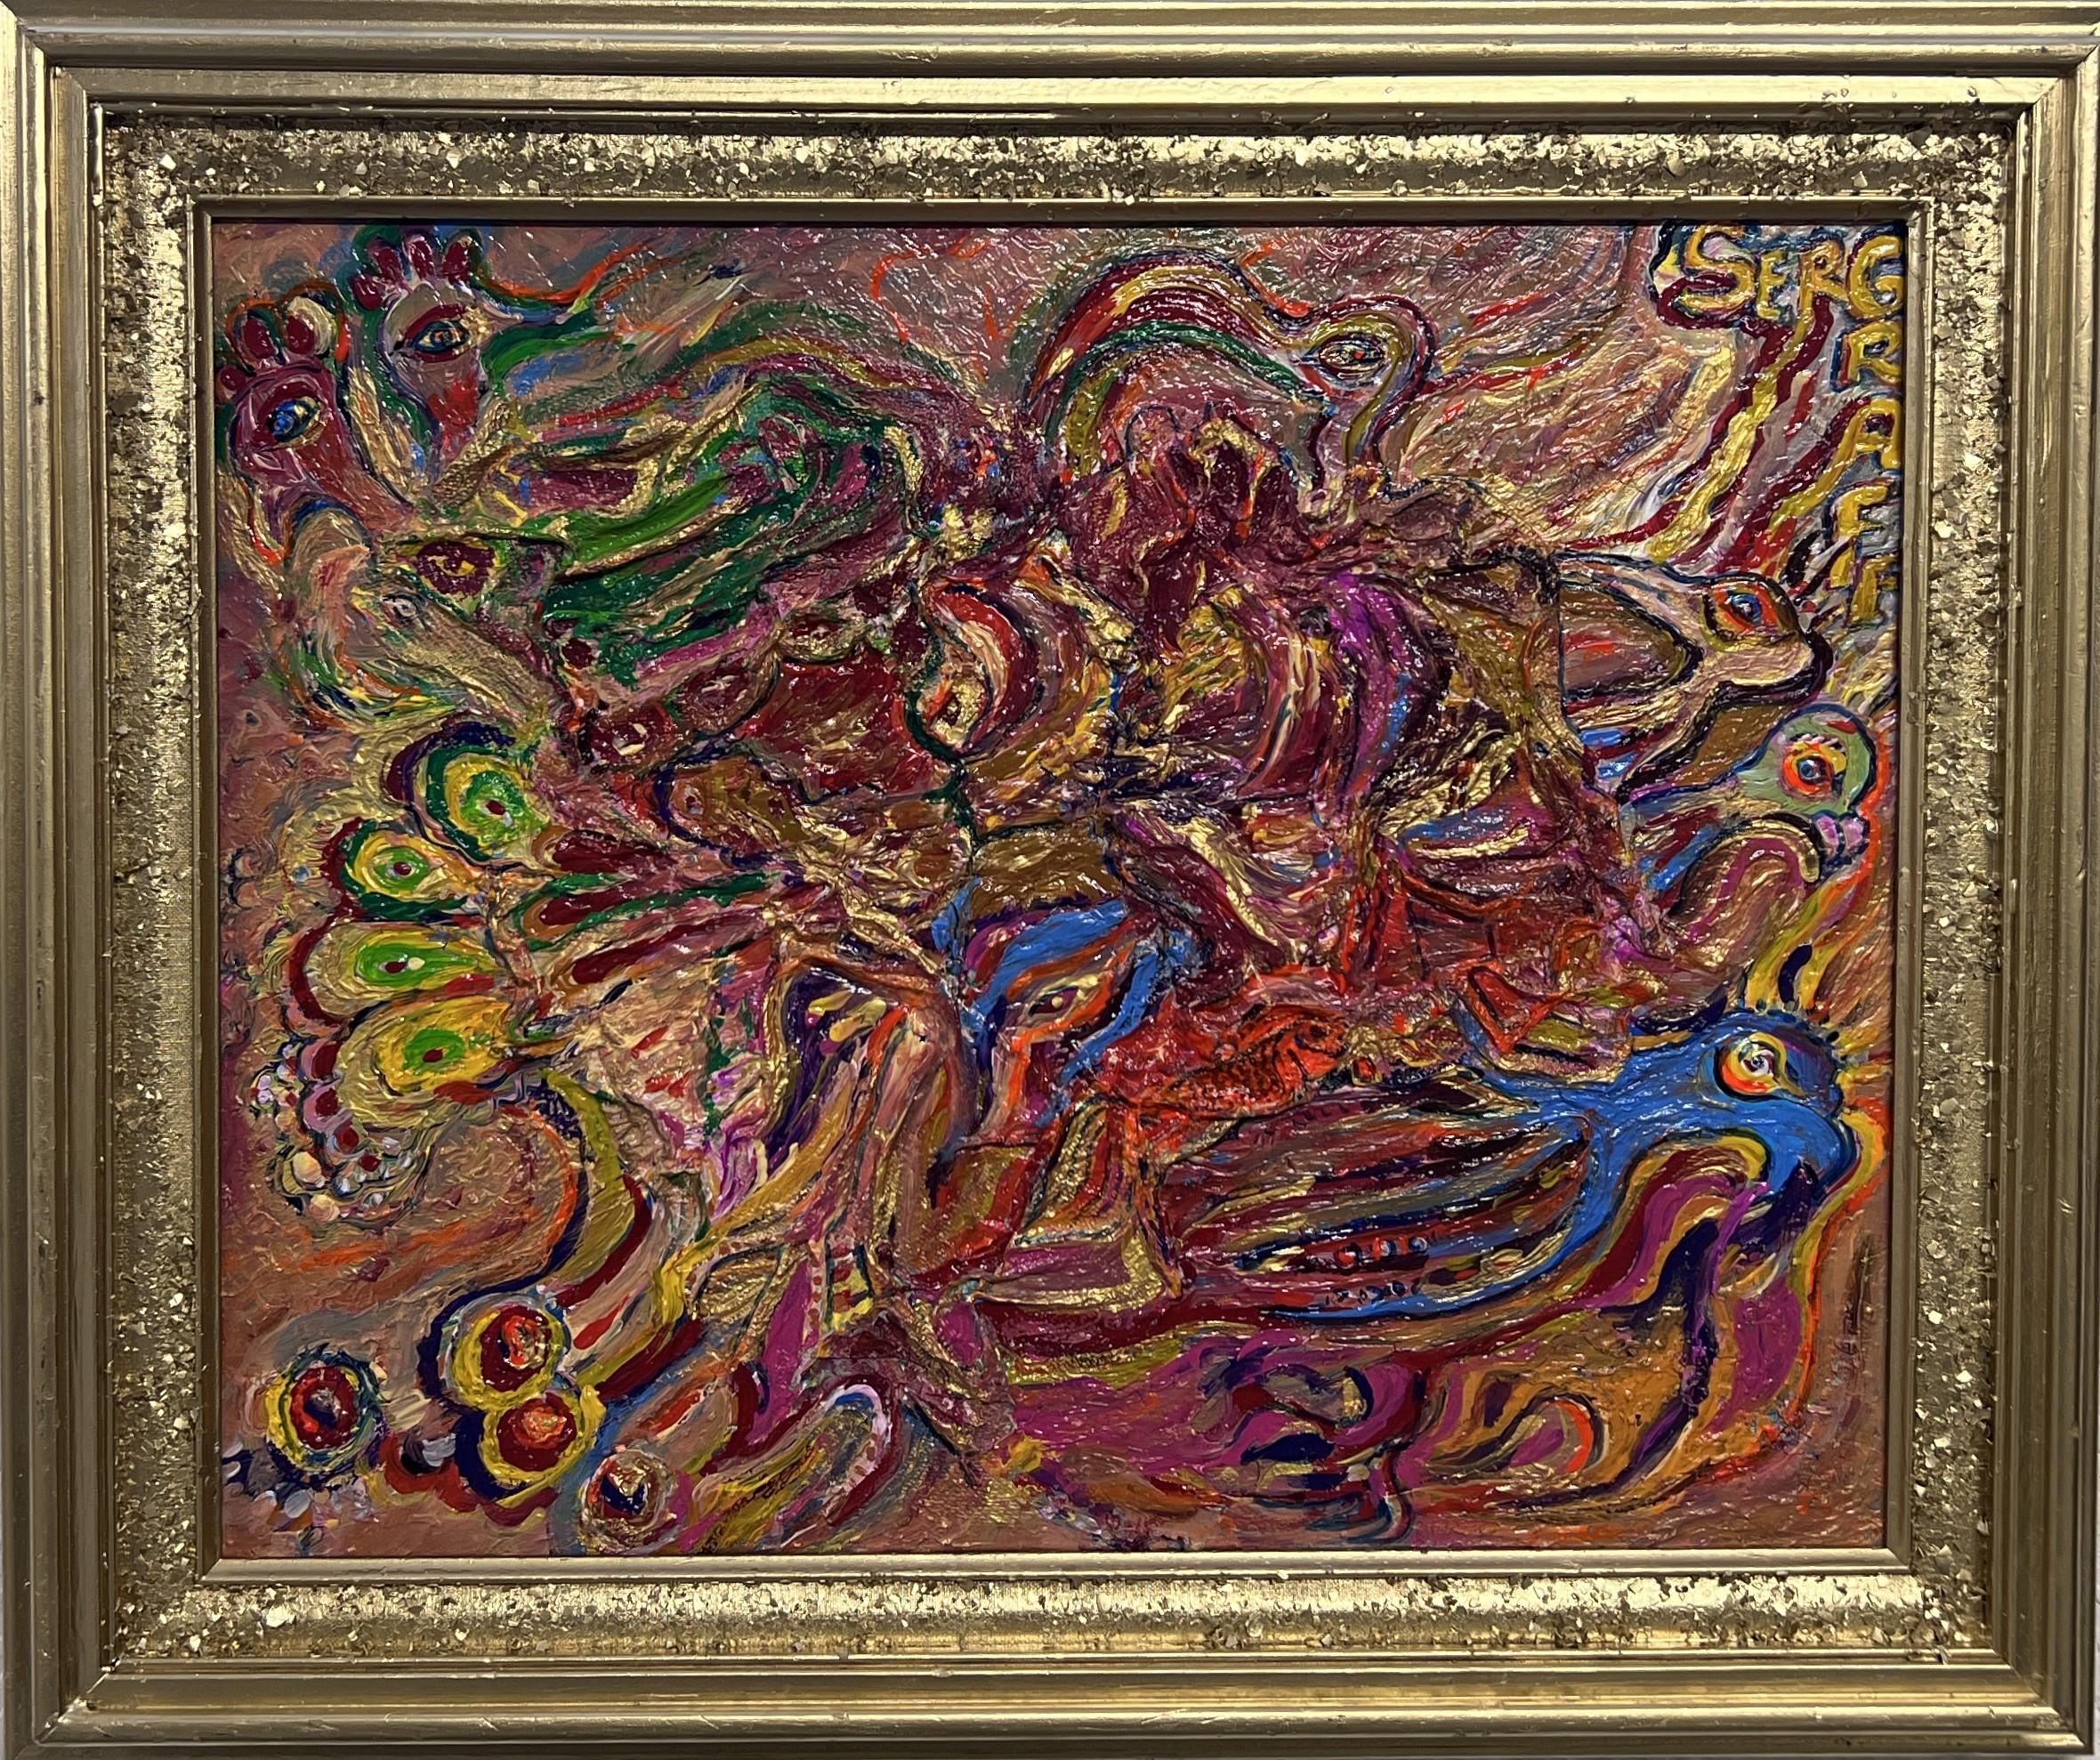 This is a unique original acrylic painting on canvas in a fantasy abstract style by Serg Graff Titled "Loop". 

It comes signed, dated, and with a COA (Certificate of Authenticity). 

Presented in a gold frame. 

Excellent condition. 
Please note